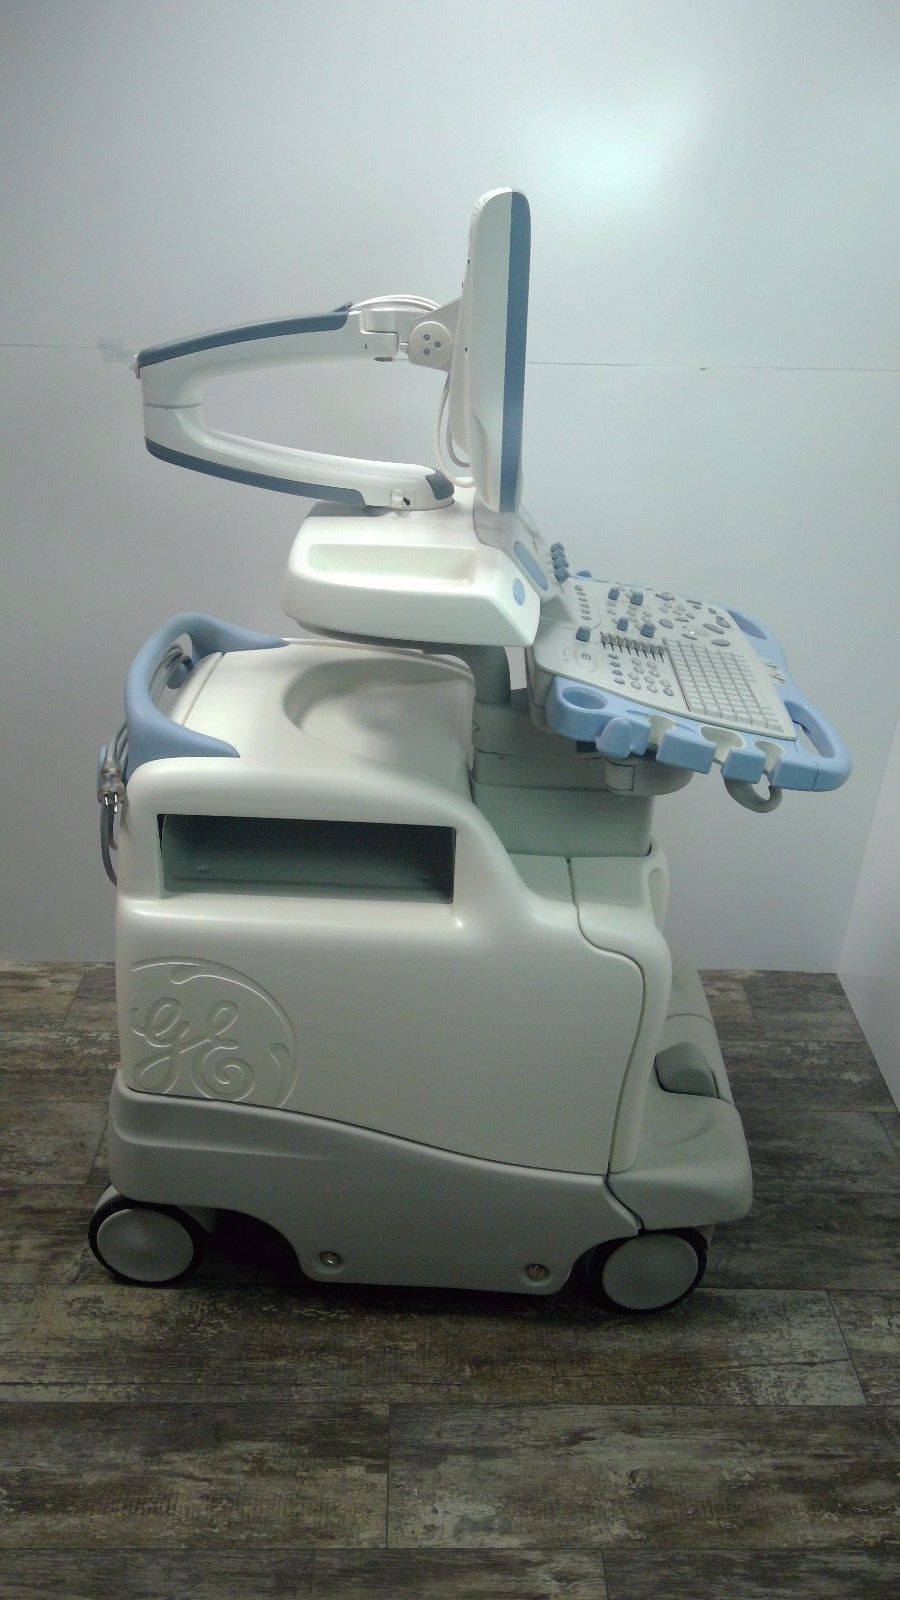 a medical device sitting on top of a wooden floor